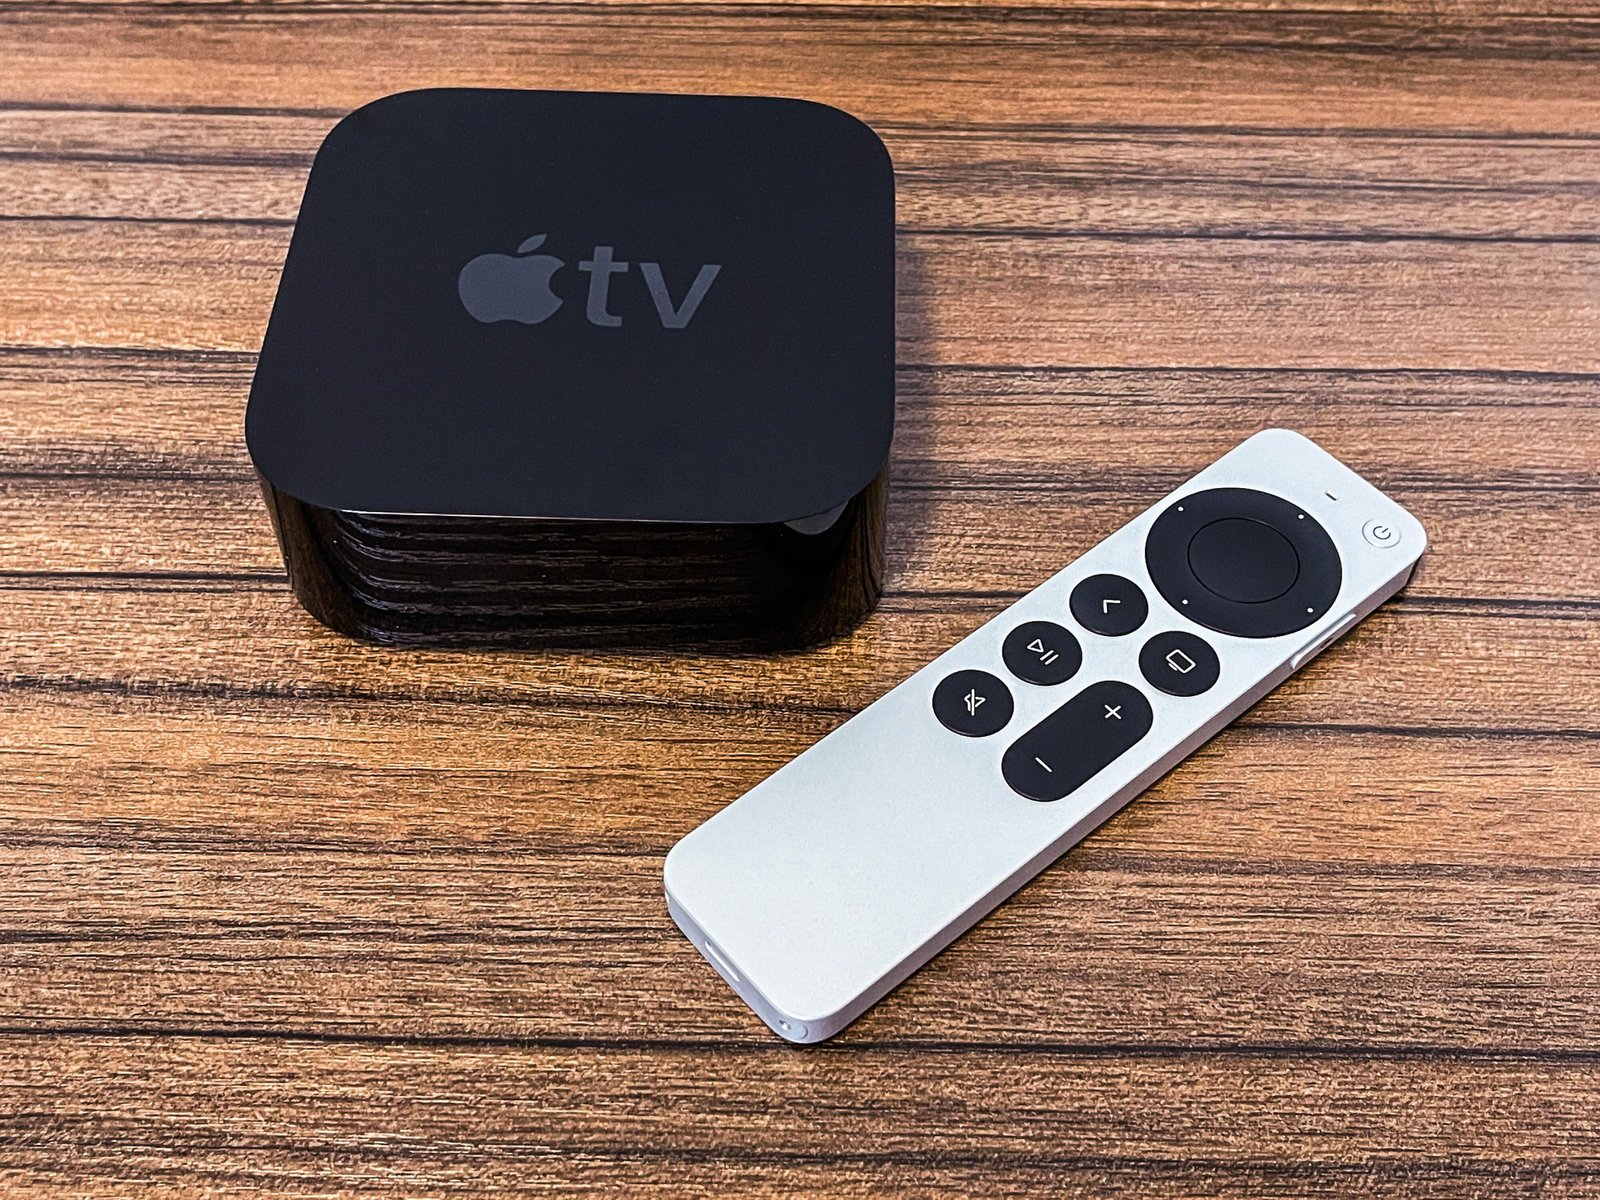 Apple TV 4K: An Uncompromising Fully-Featured Streaming Box